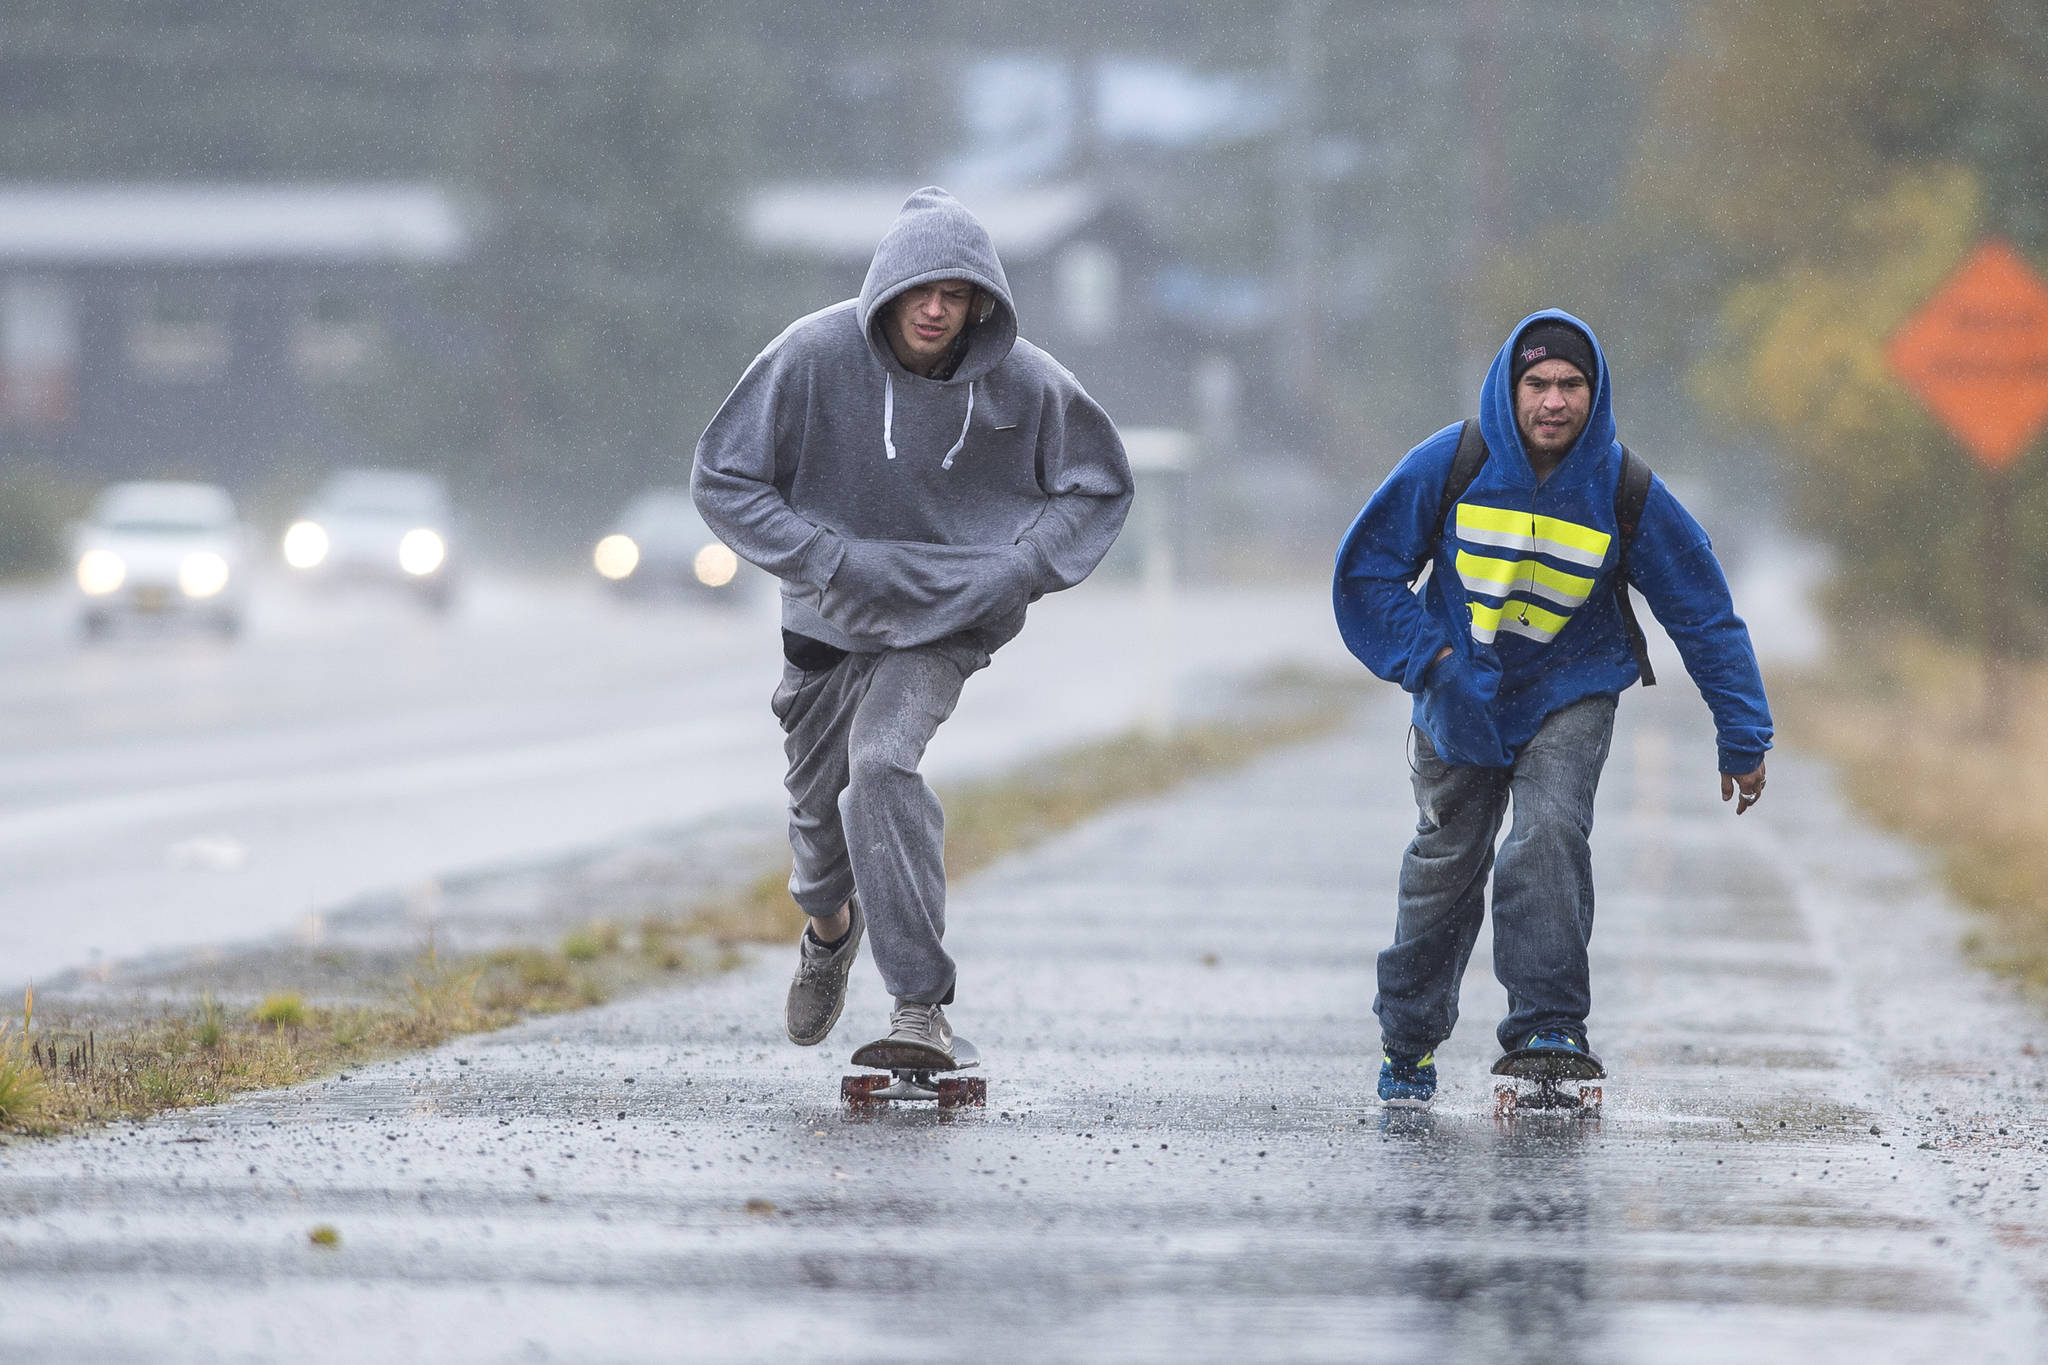 Domanic Quick, left, and Ben Kinser travel by skateboard through the rain along Egan Drive on Tuesday, Sept. 25, 2018. The National Weather Service is calling for periods of rain on Wednesday with a high near 55. (Michael Penn | Juneau Empire)